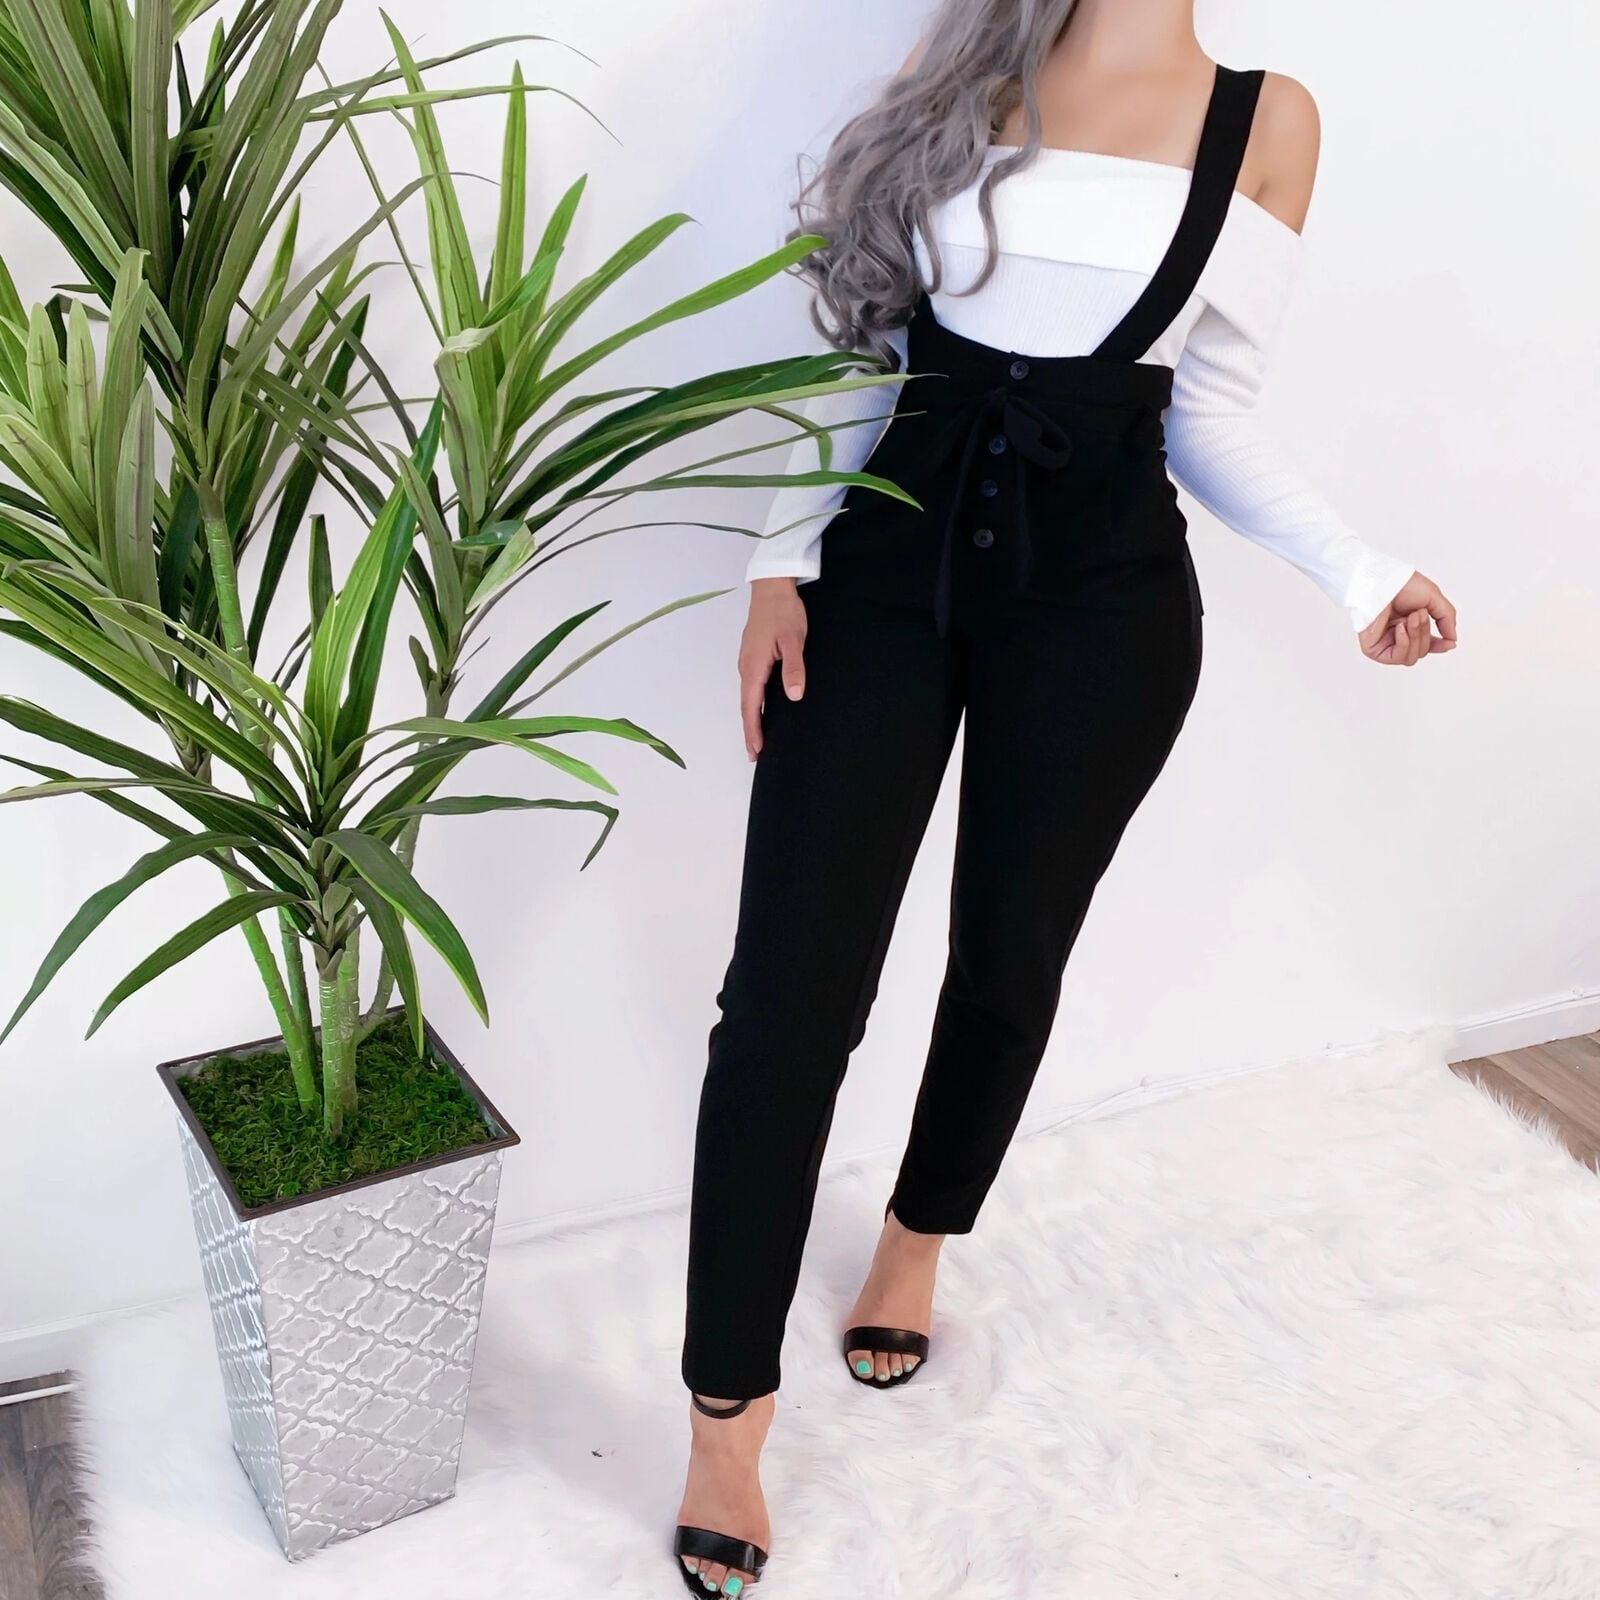 HighWaisted Trouser Pants with Suspenders  Fashion Trousers women high  waisted Fashion outfits